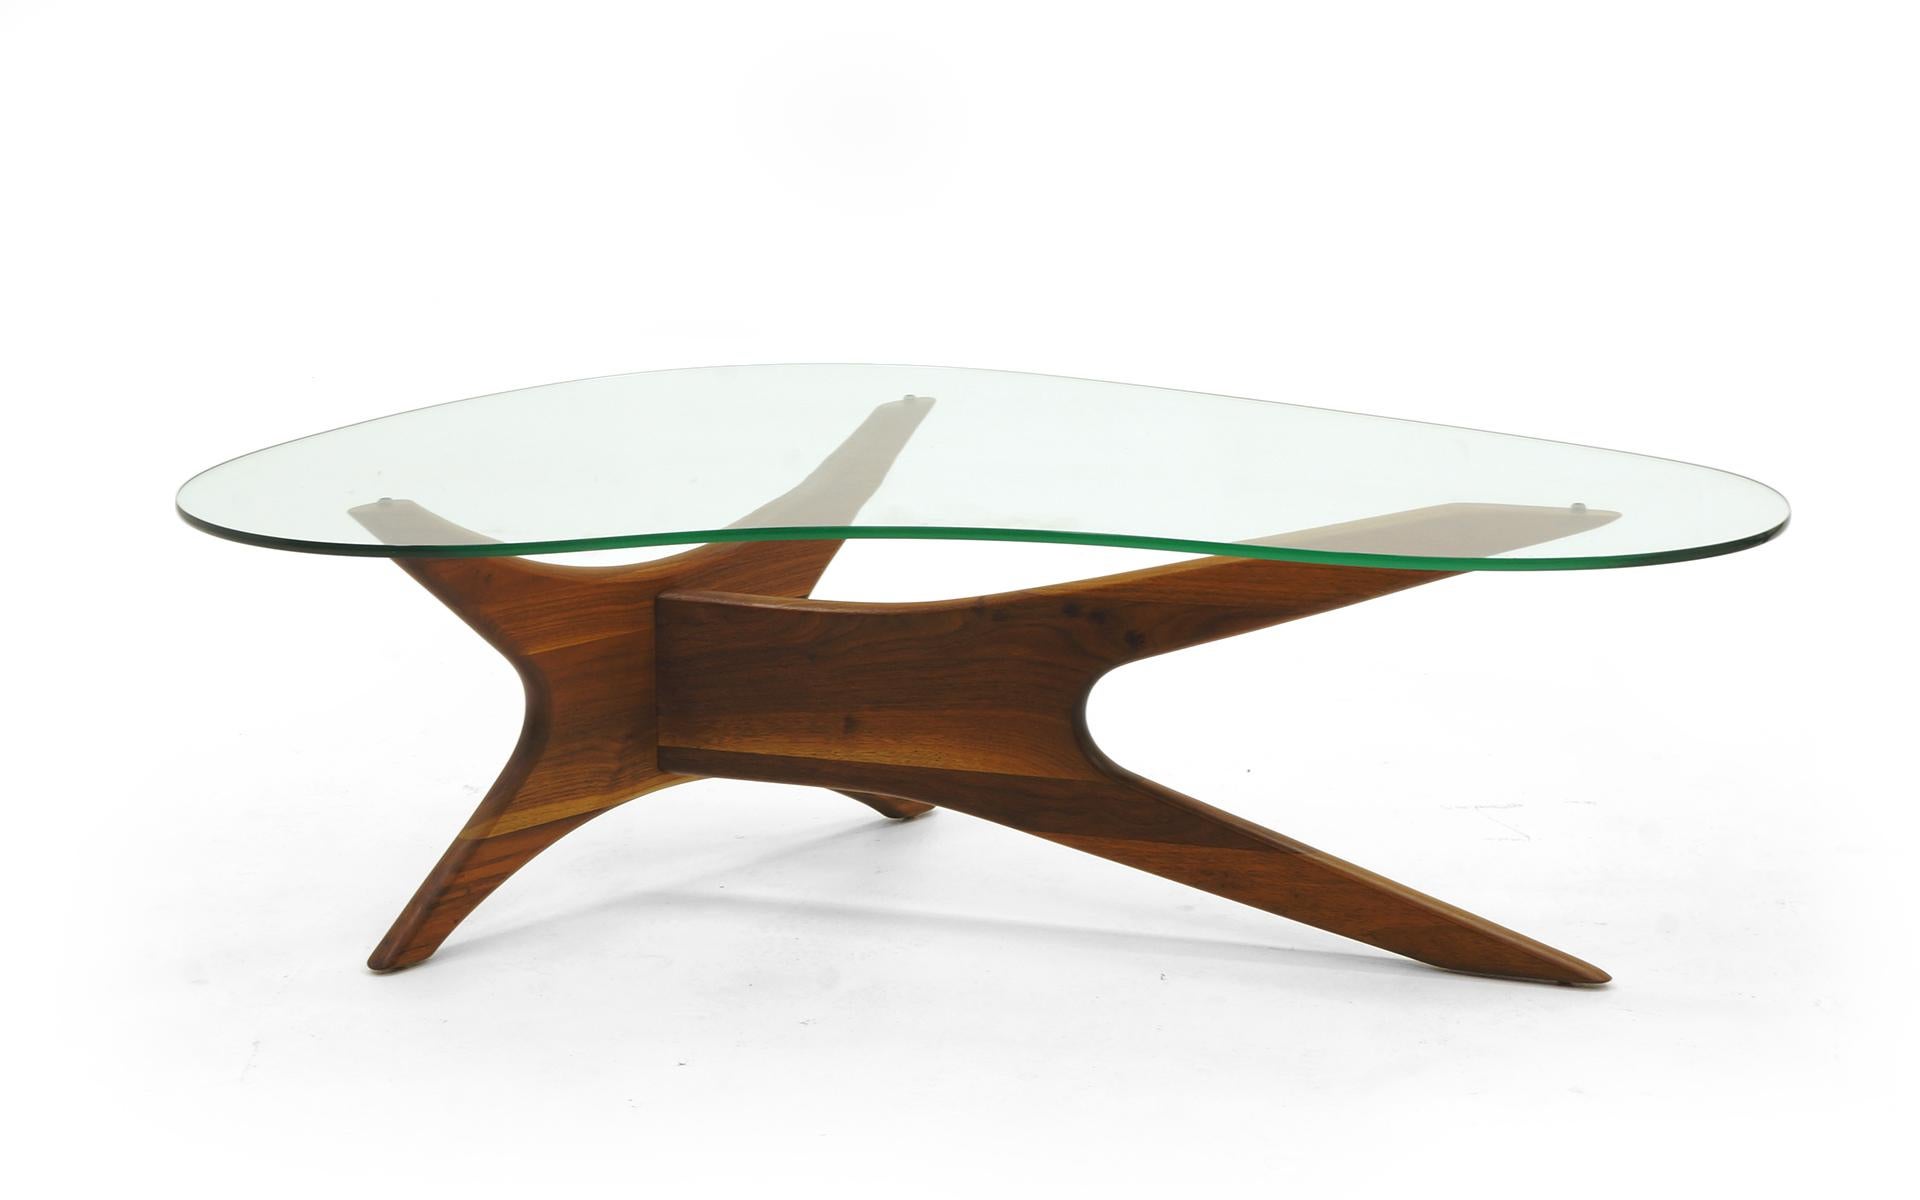 Original set of tables designed by Adrian Pearsall for craft associates. Tripod / three legged sculptural bases. Original glass with no chips and only minor scratches. Original finish. Great examples of this design.

Measures: Side tables
27 in.